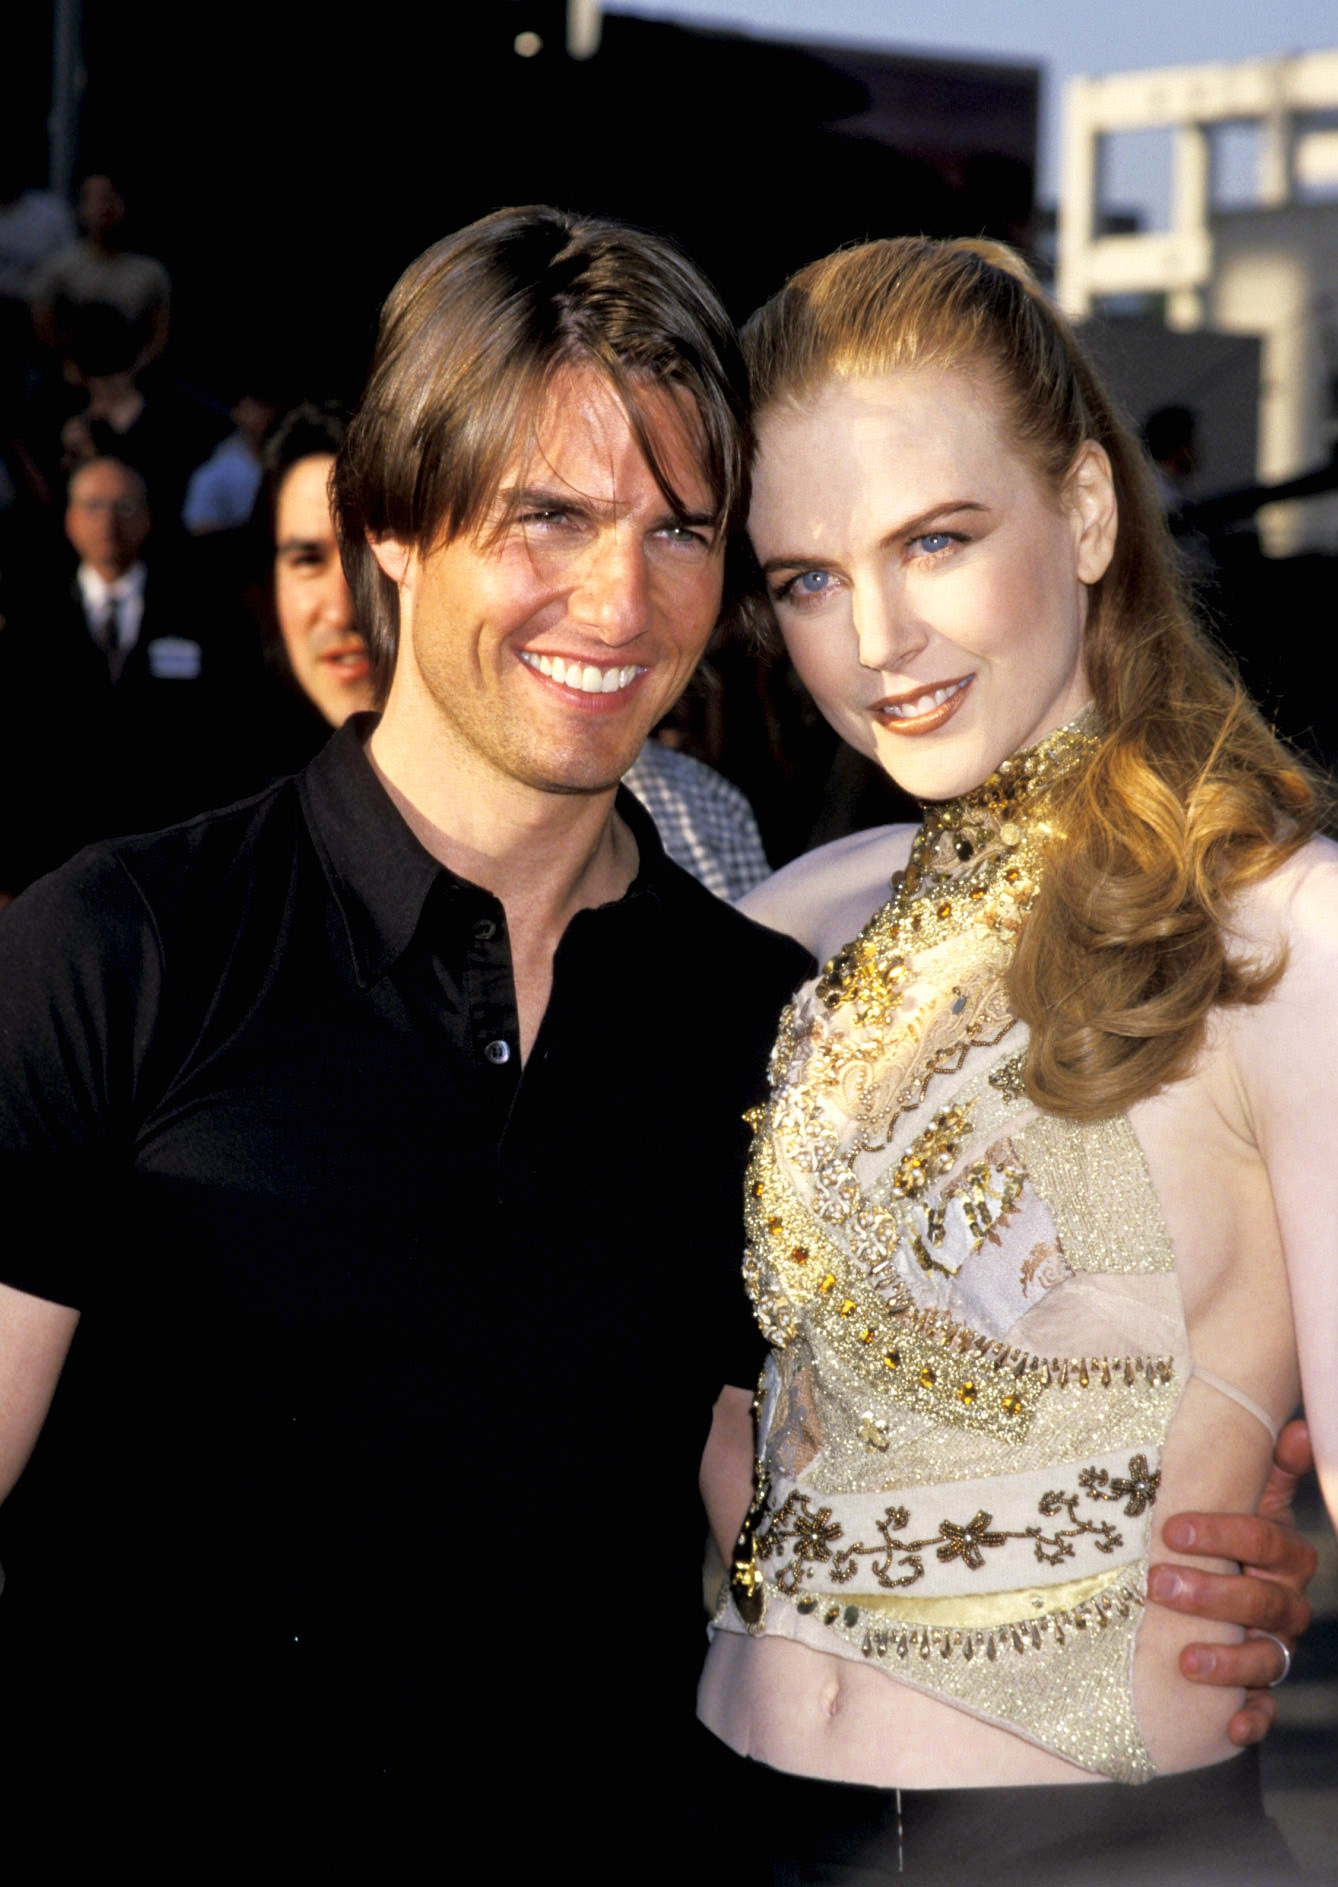 is tom cruise with anyone